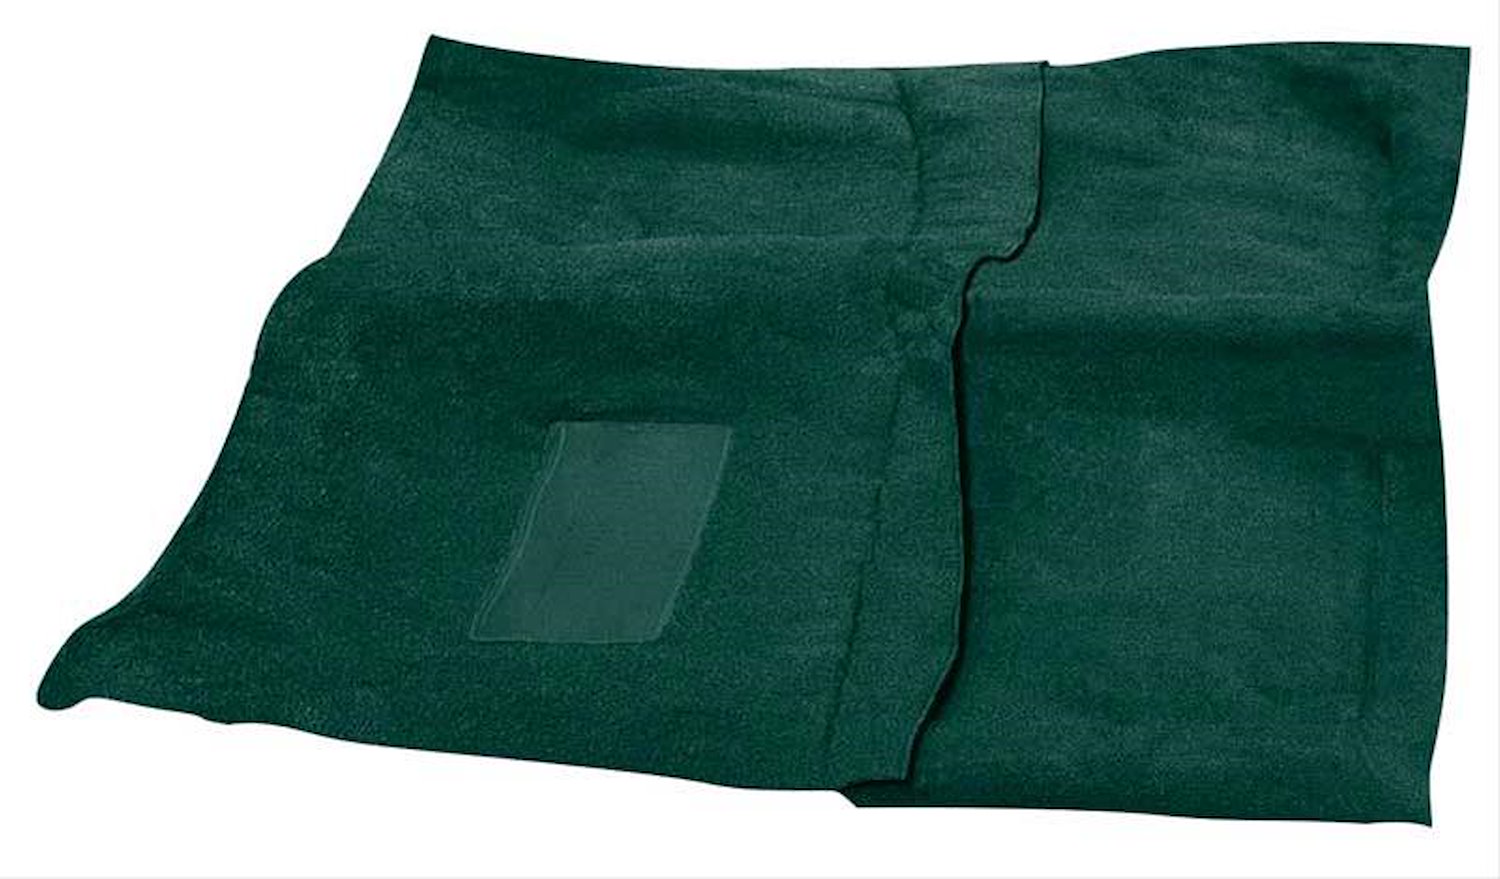 MA530508 Loop Carpet With Tails 1967-69 Dodge Dart Convertible With 4-Speed Dark Green